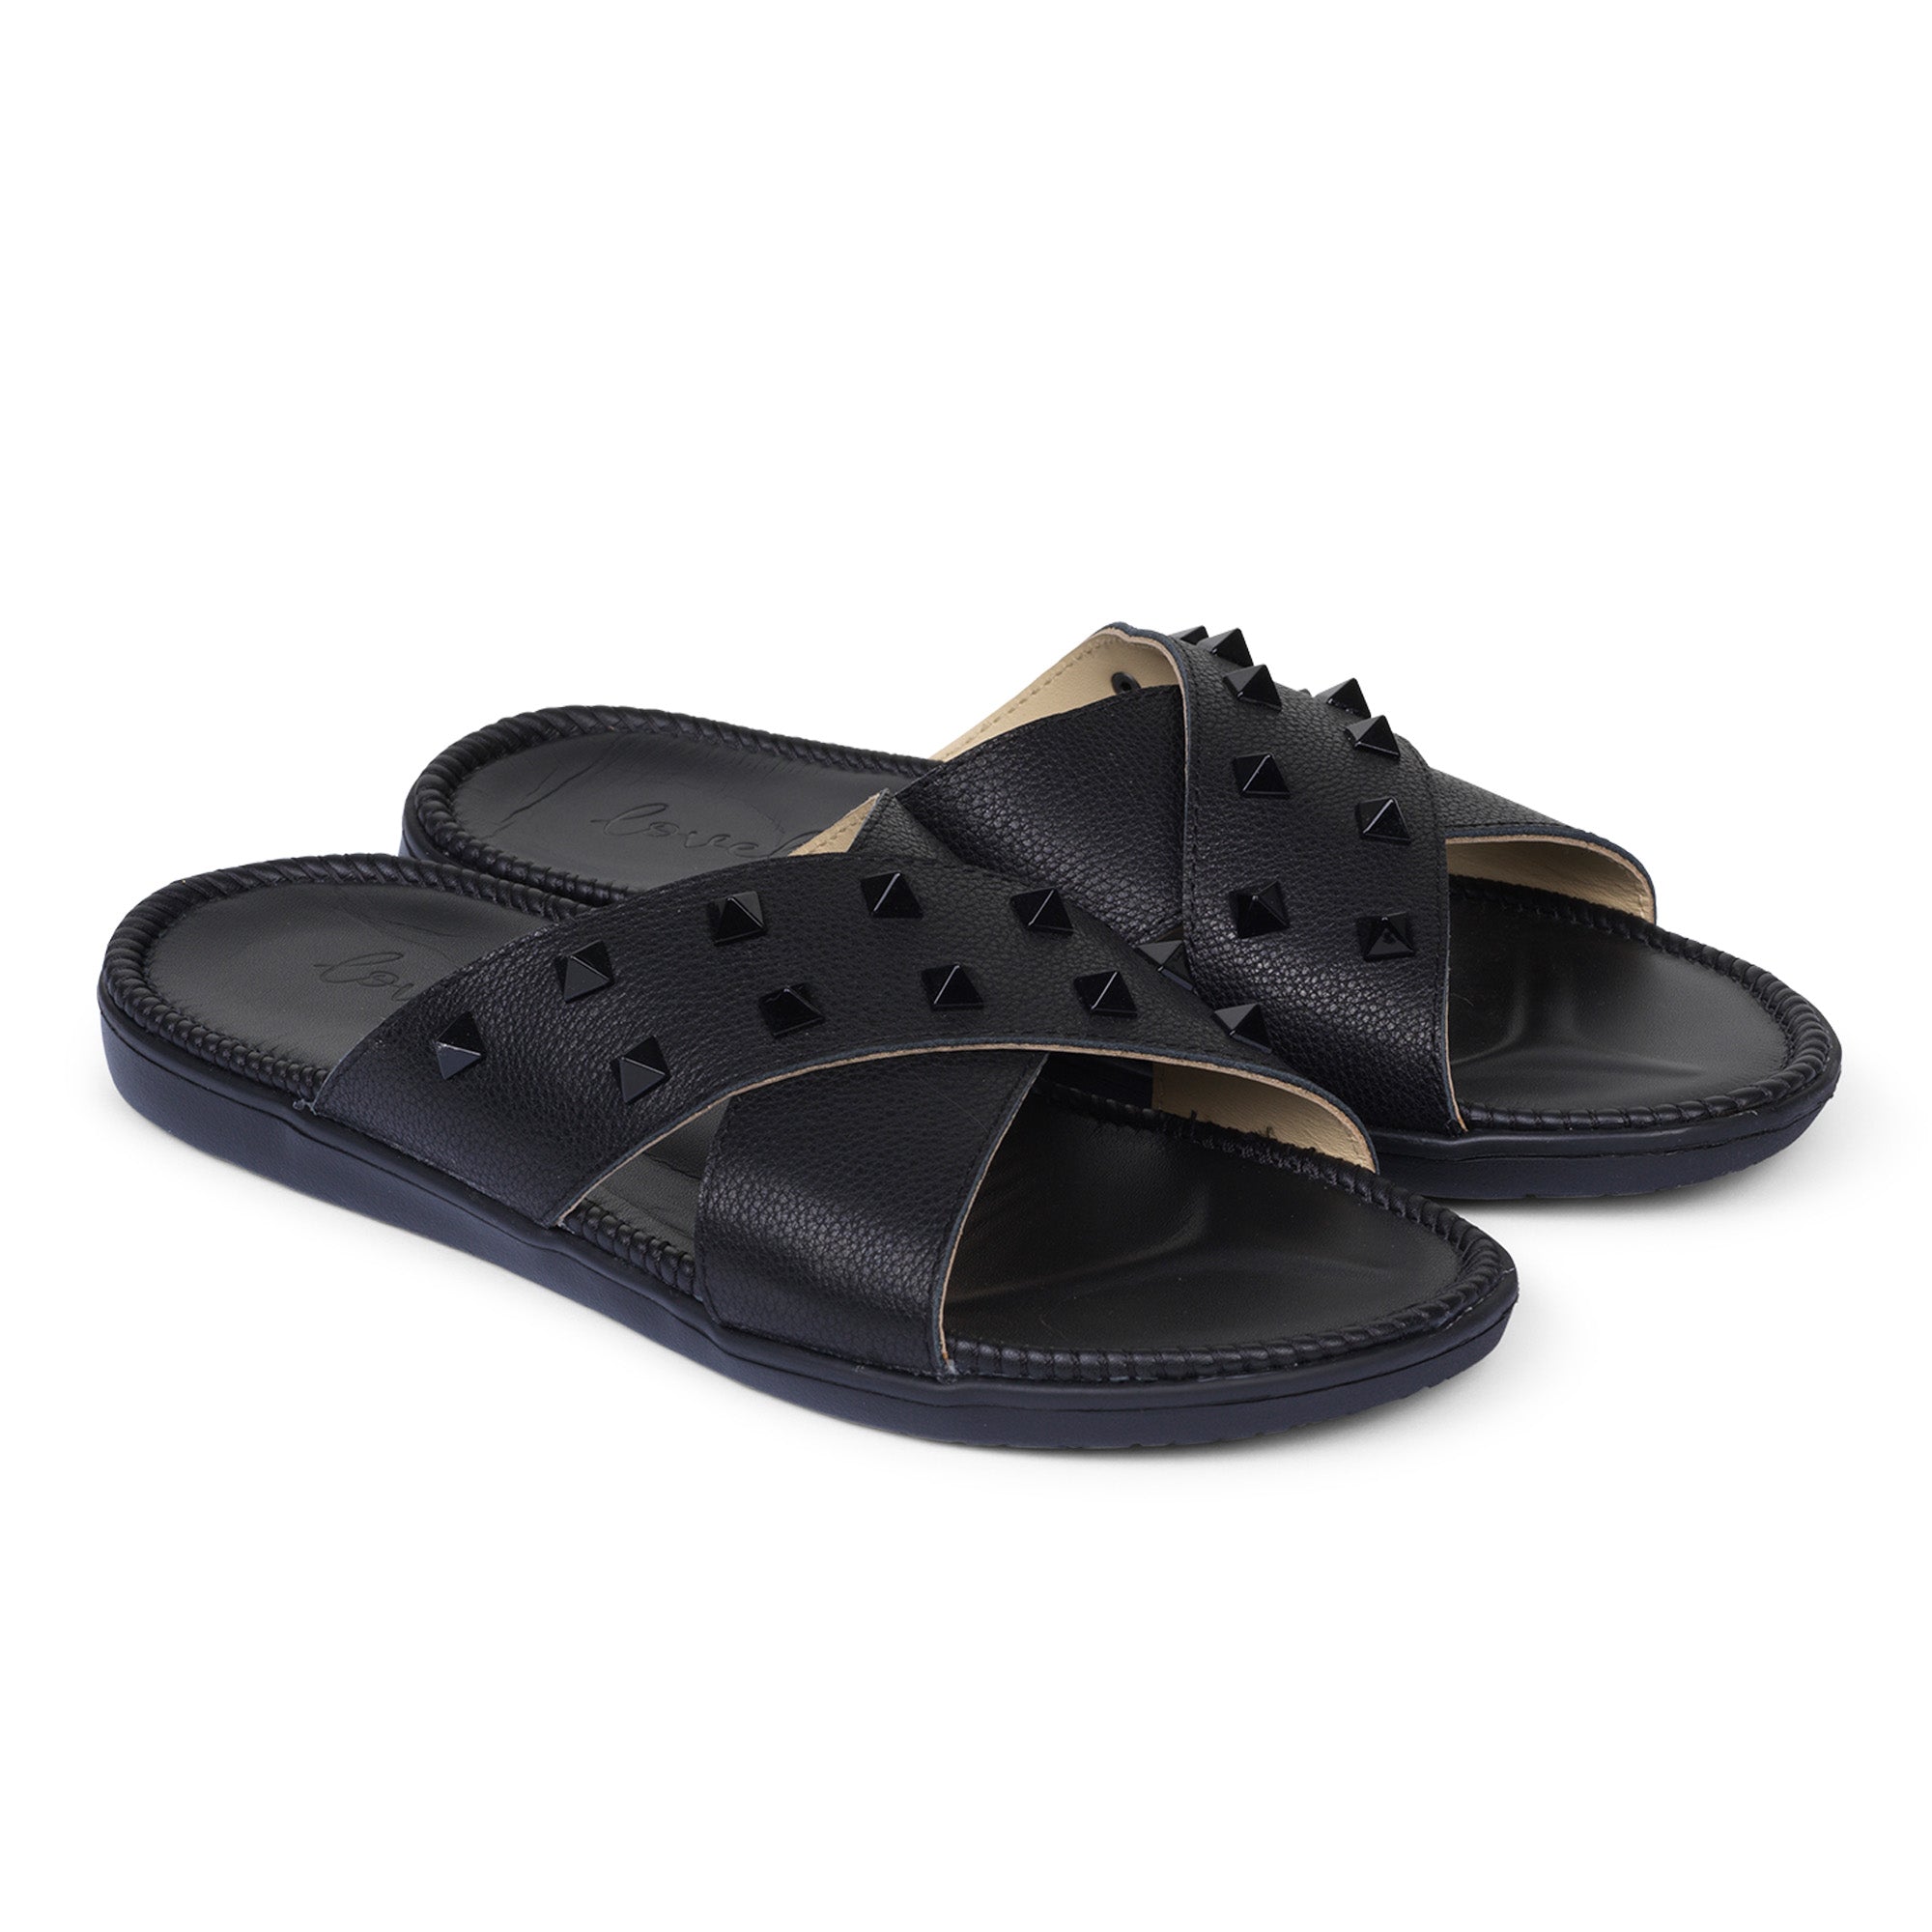 Loto with Rivets - Cross leather sandal